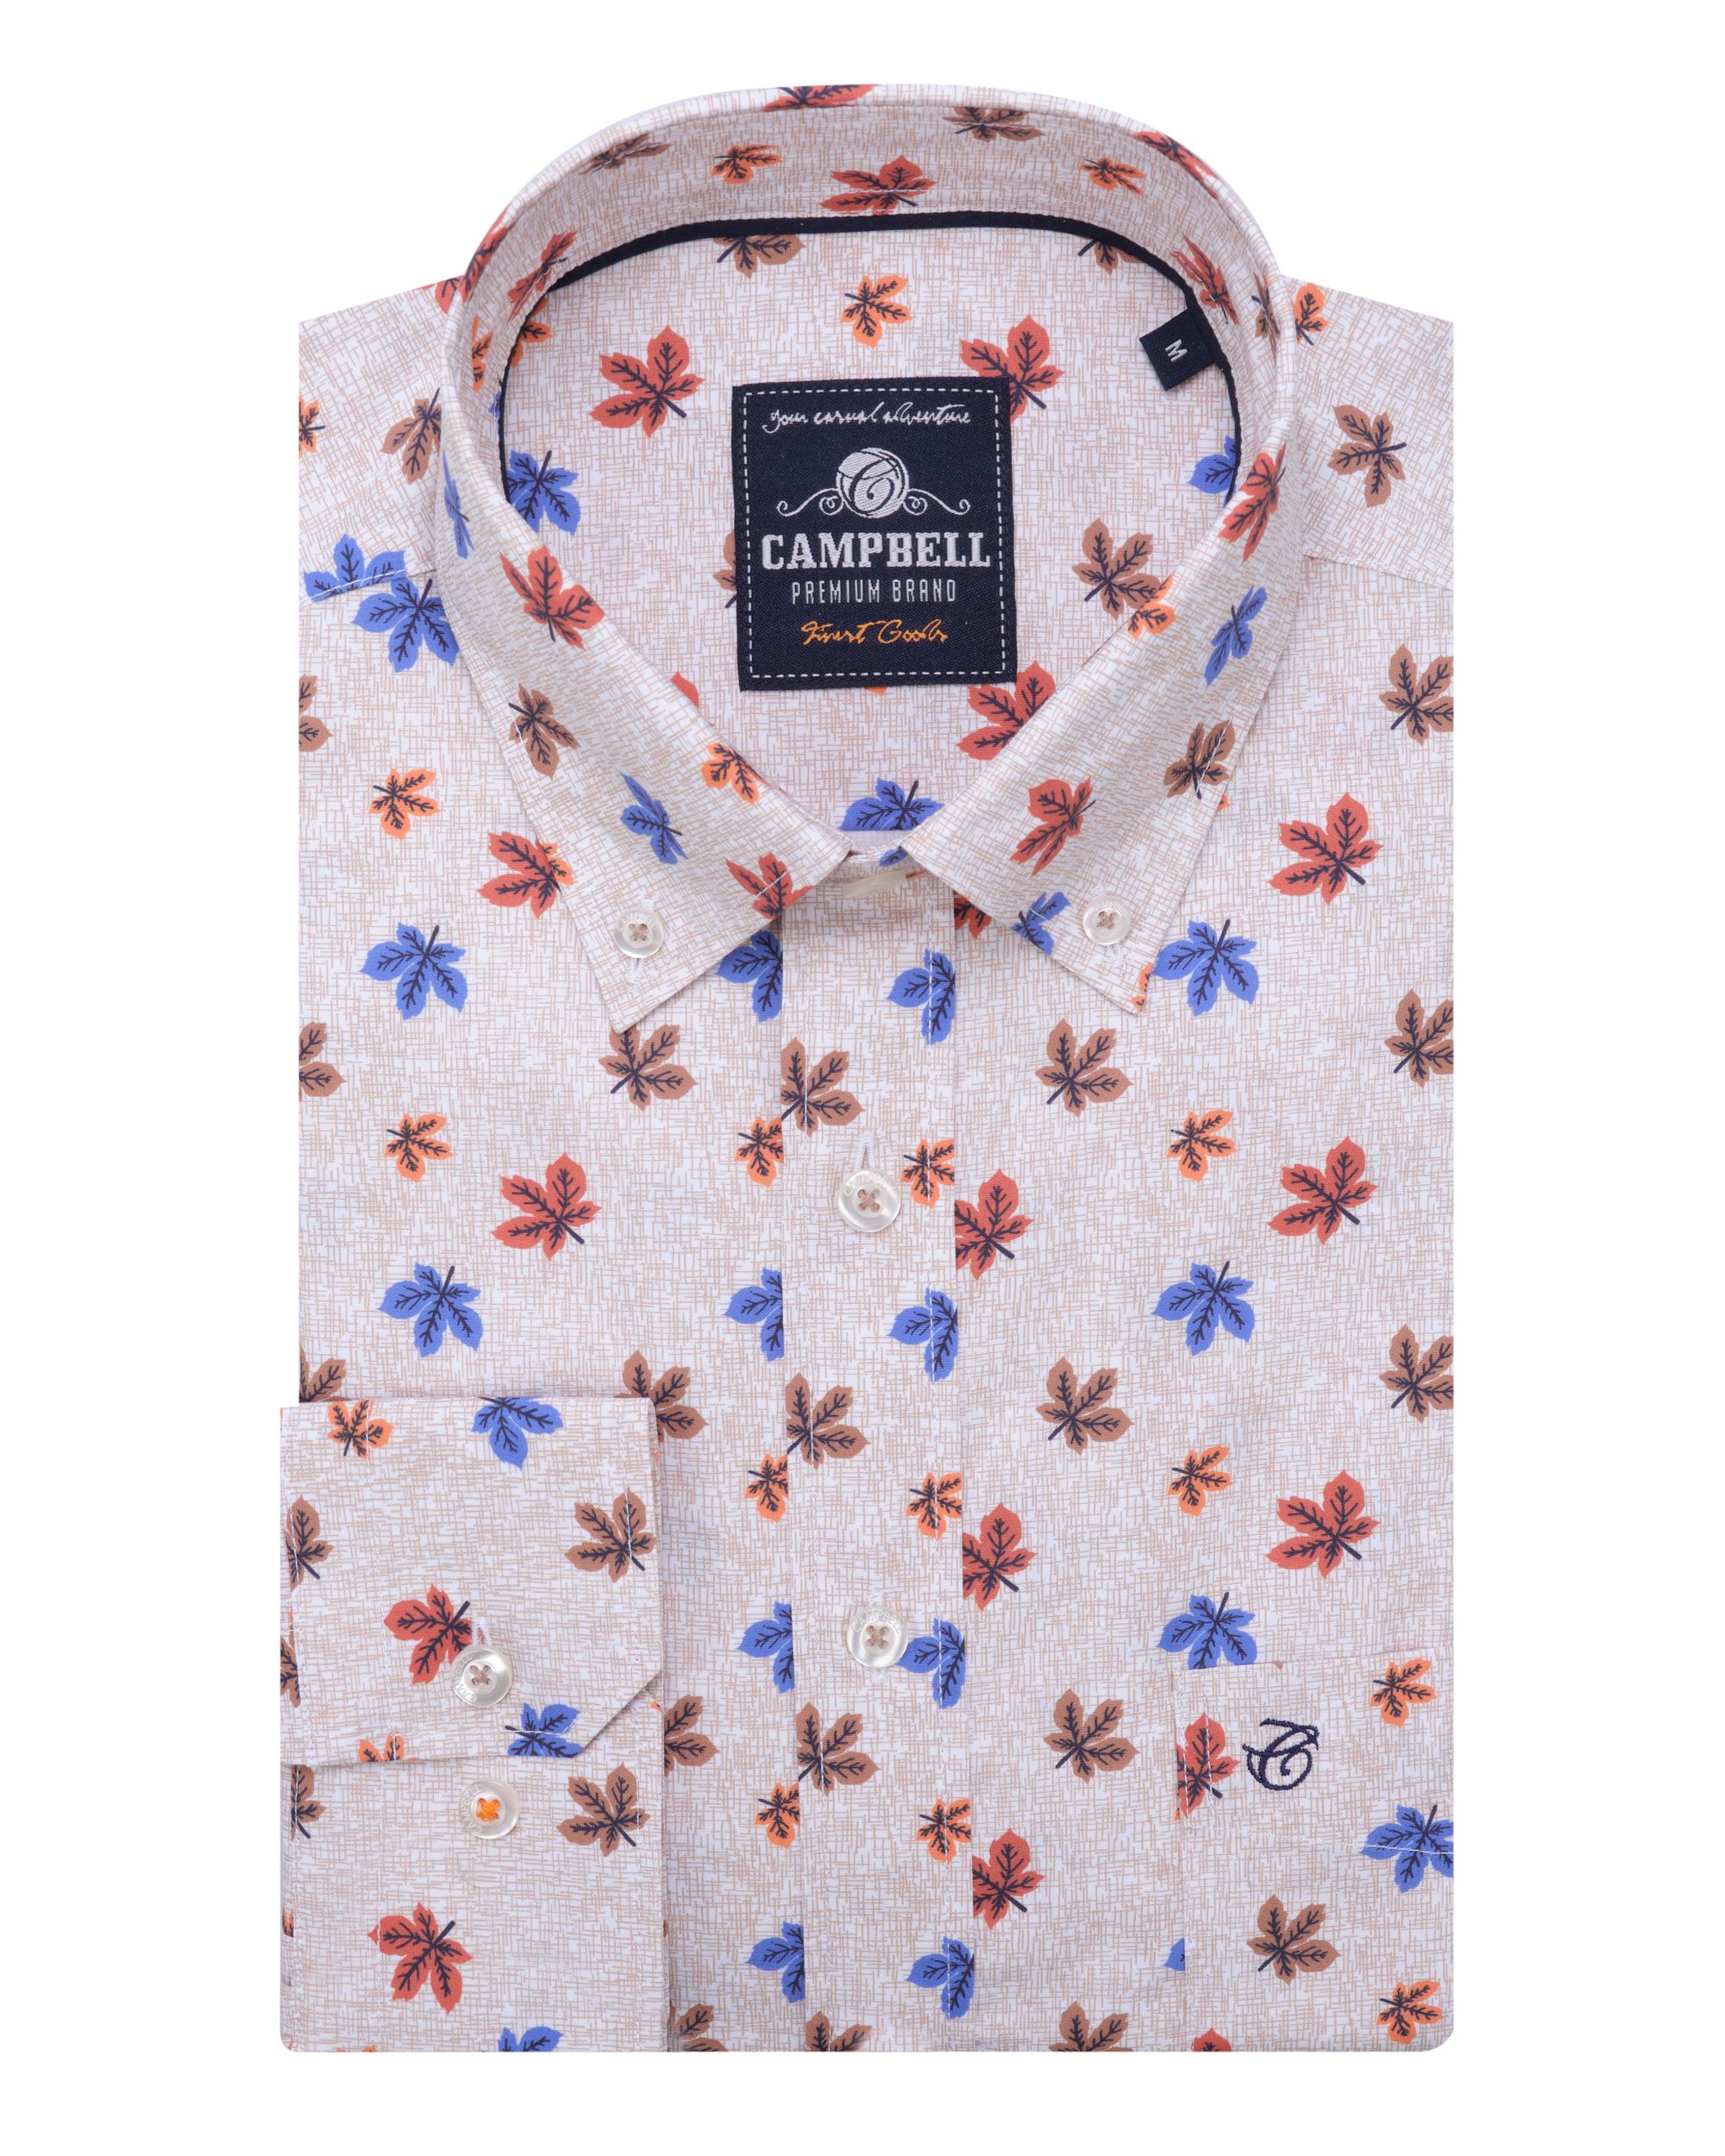 Campbell Classic Casual Overhemd LM Beige dessin 084665-001-L